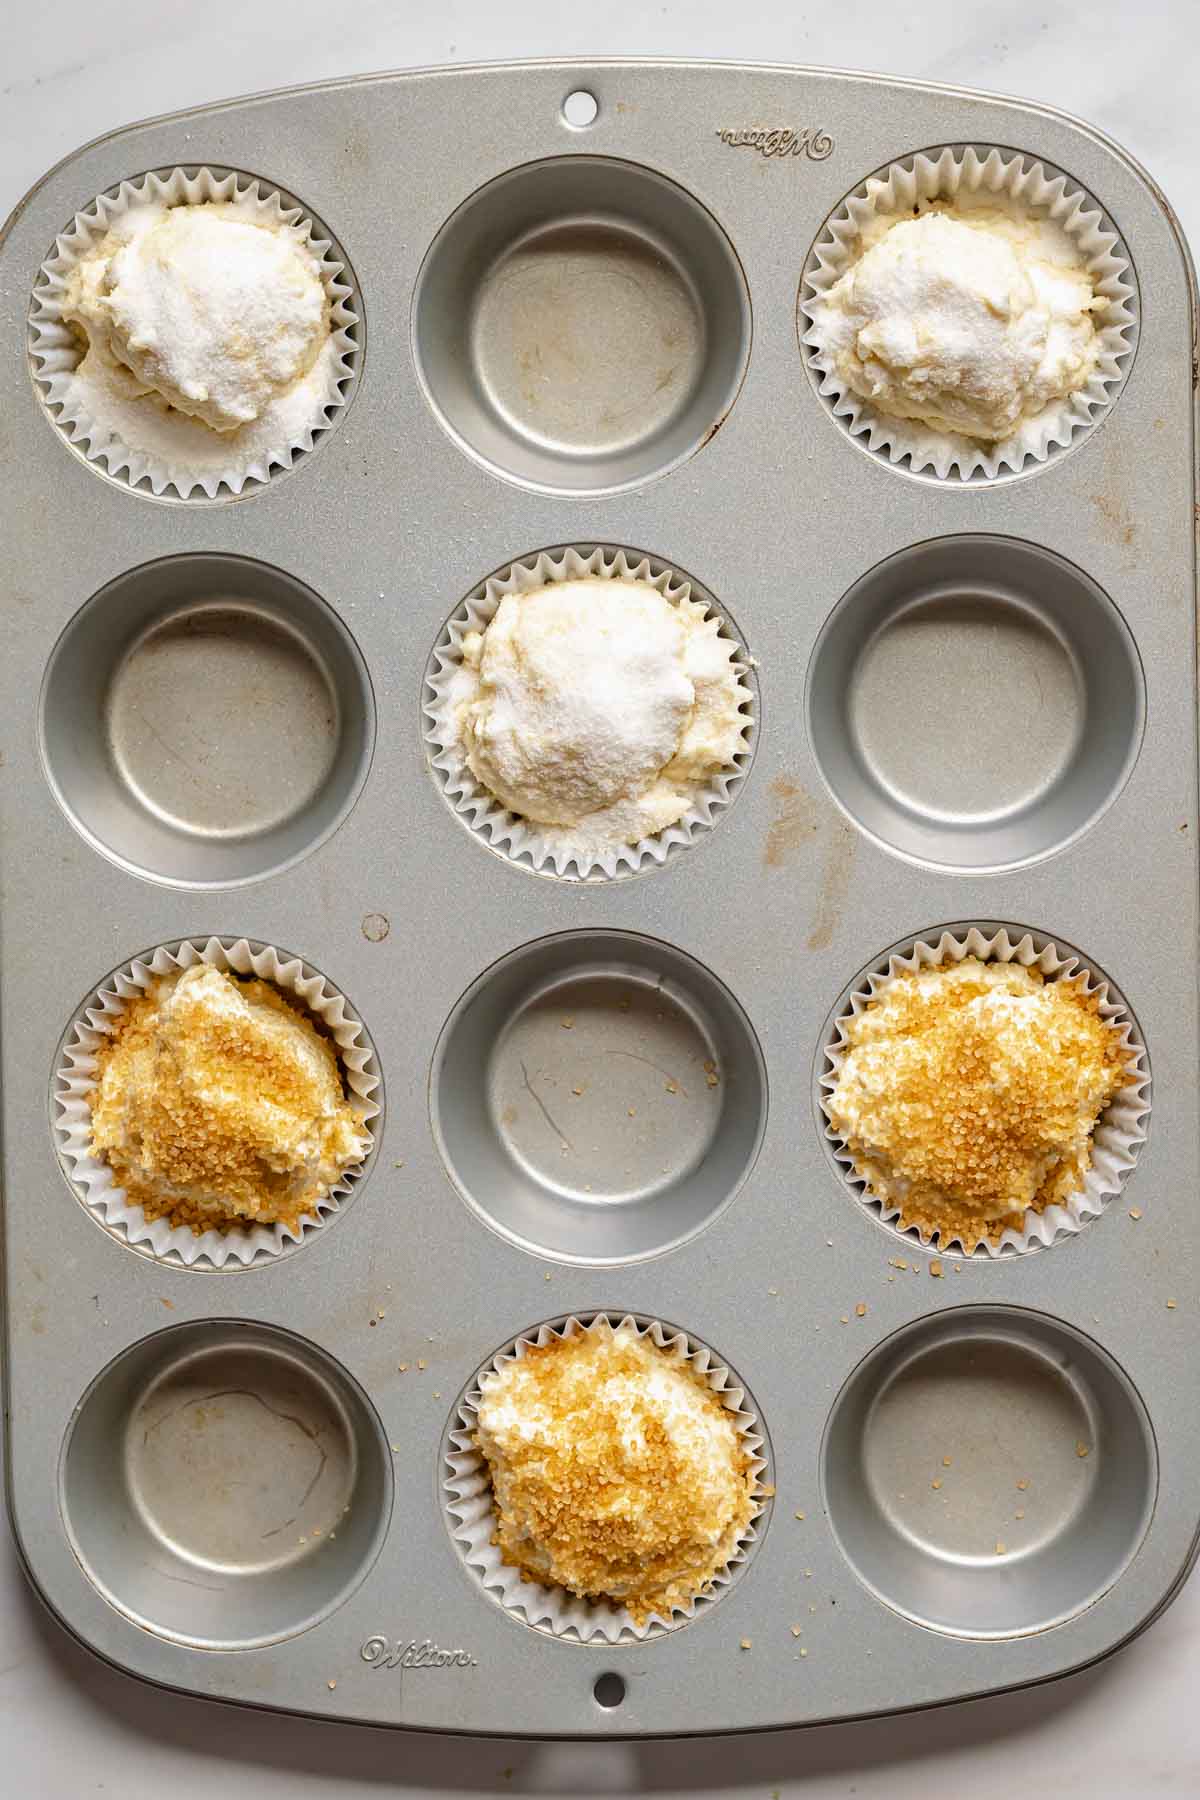 Pre-baked muffins topped with sugar.